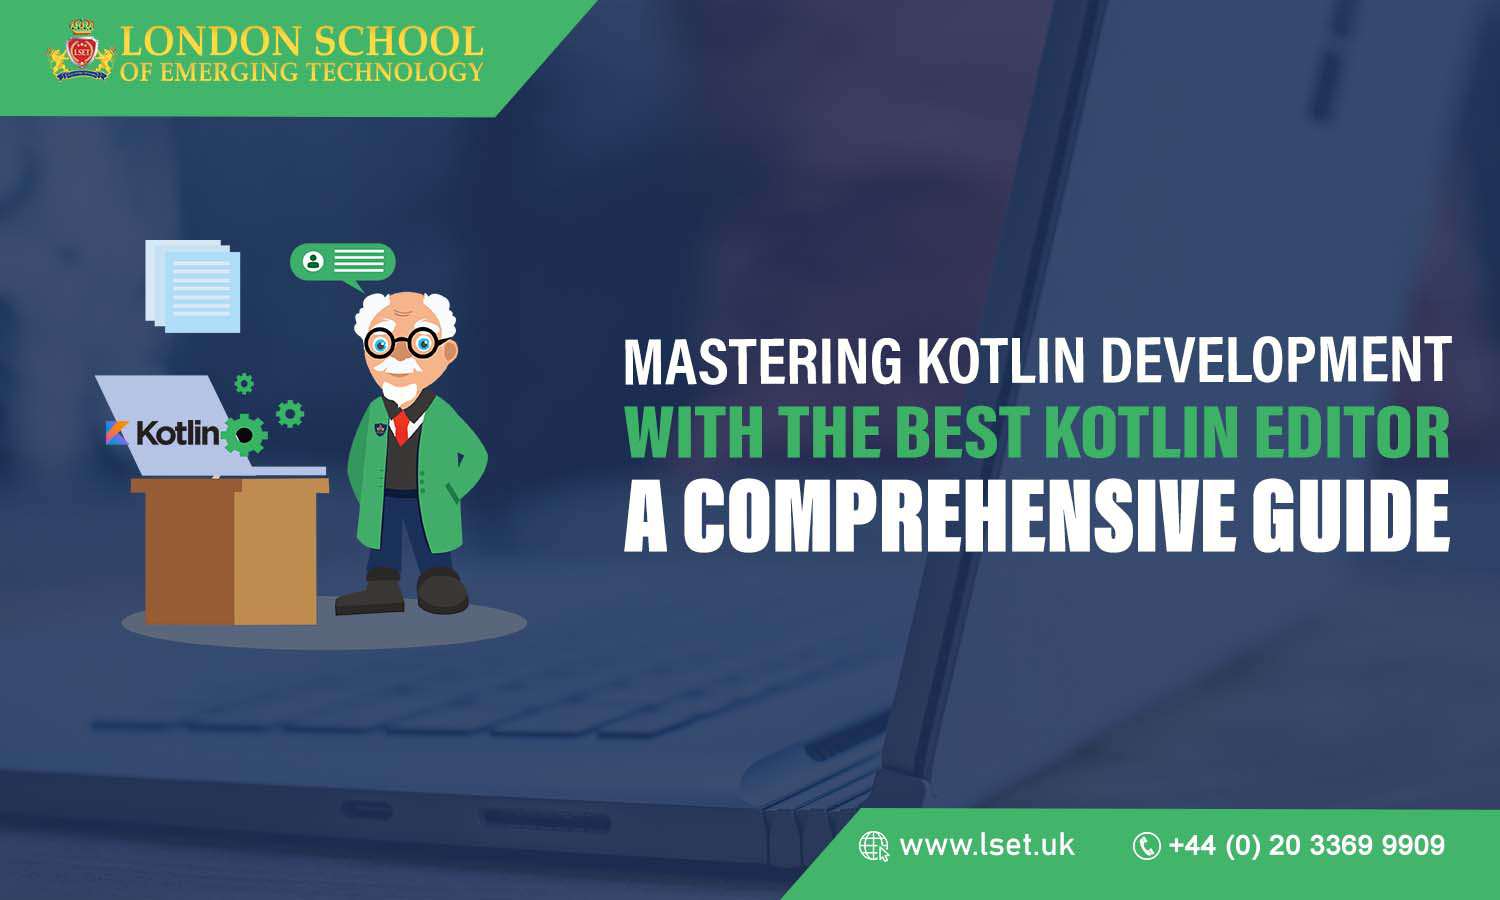 Mastering Kotlin Development with the Best Kotlin Editor A Comprehensive Guide